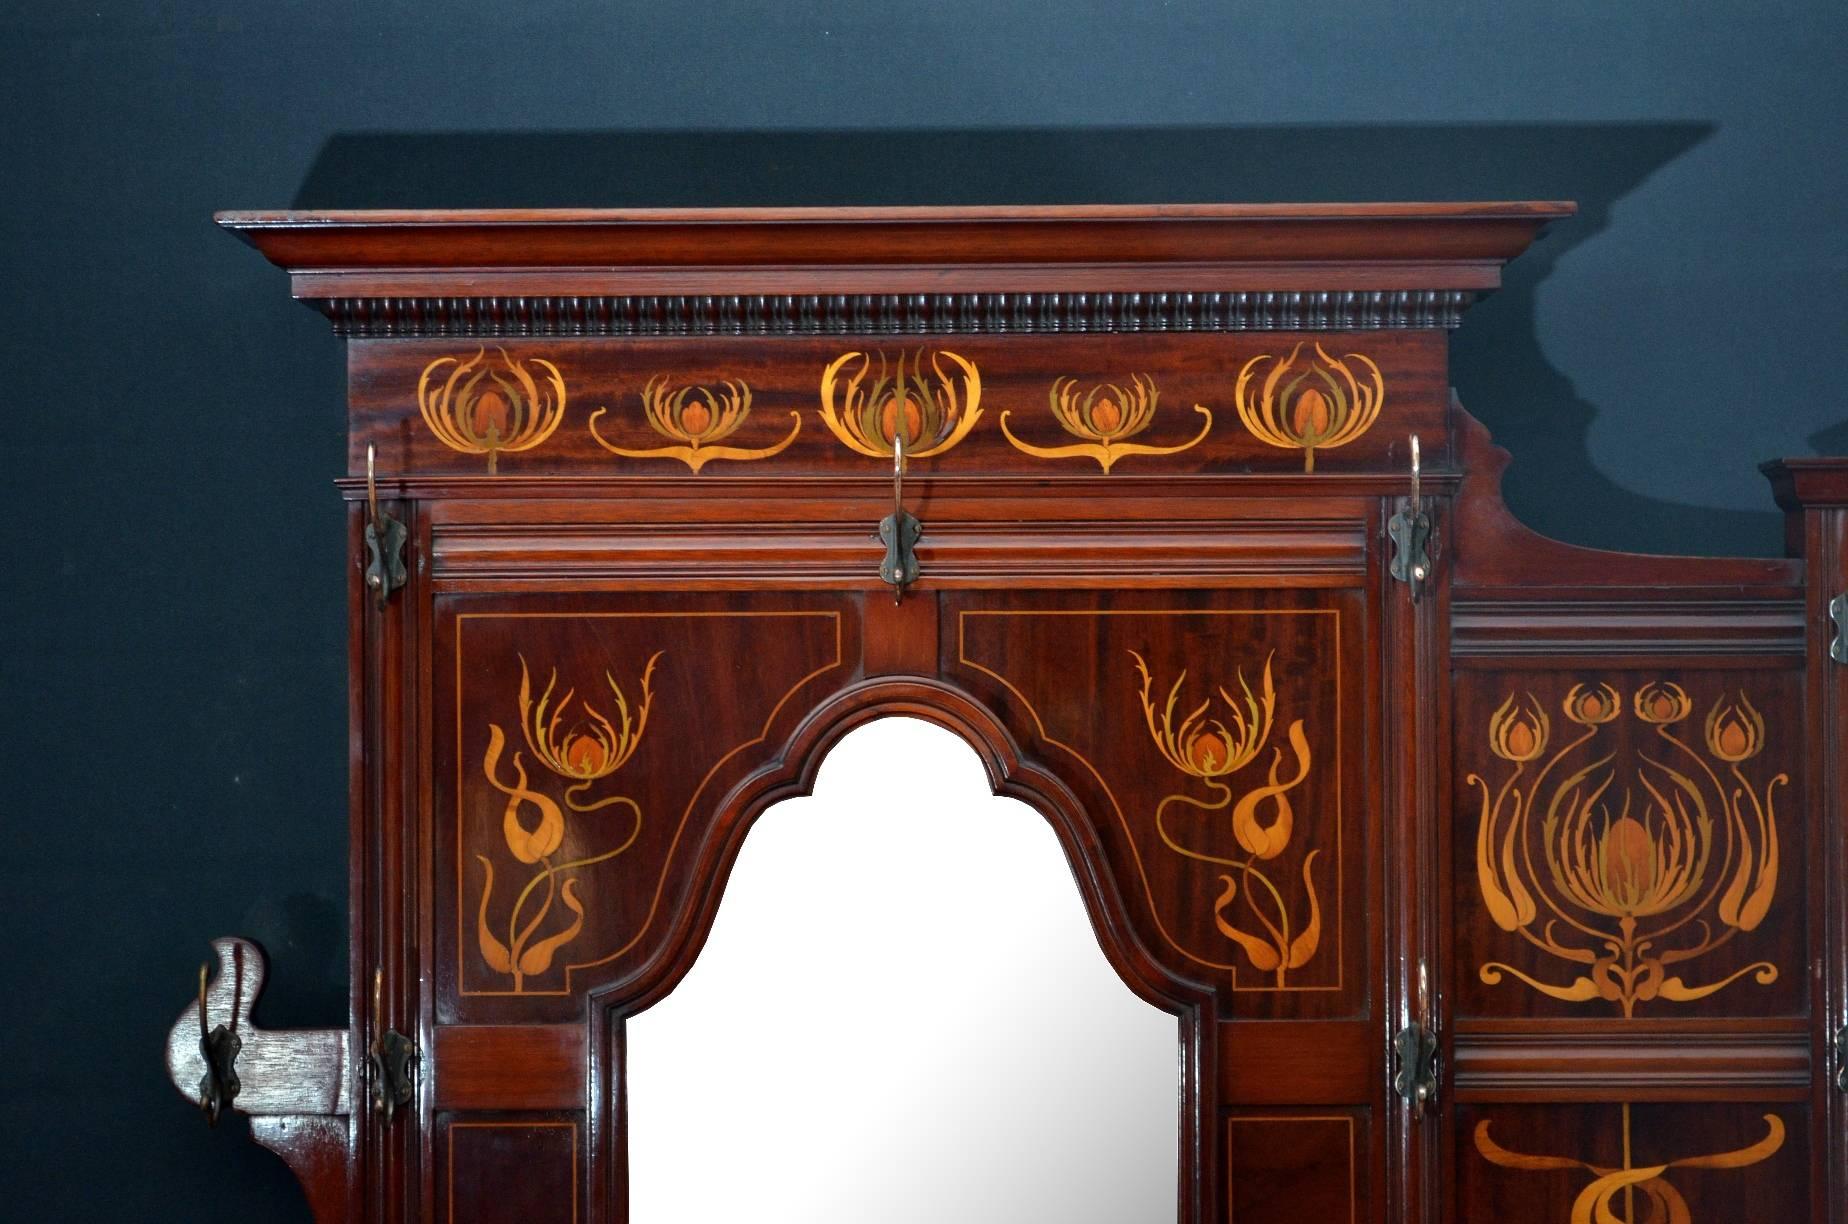 K0228, magnificent Art Nouveau mahogany and inlaid hall Stand by James Shoolbred and Co, having moulded and carved cornice above satinwood inlaid frieze, original bevelled edge mirror and 10 copper plated hooks above small shelf, the base having